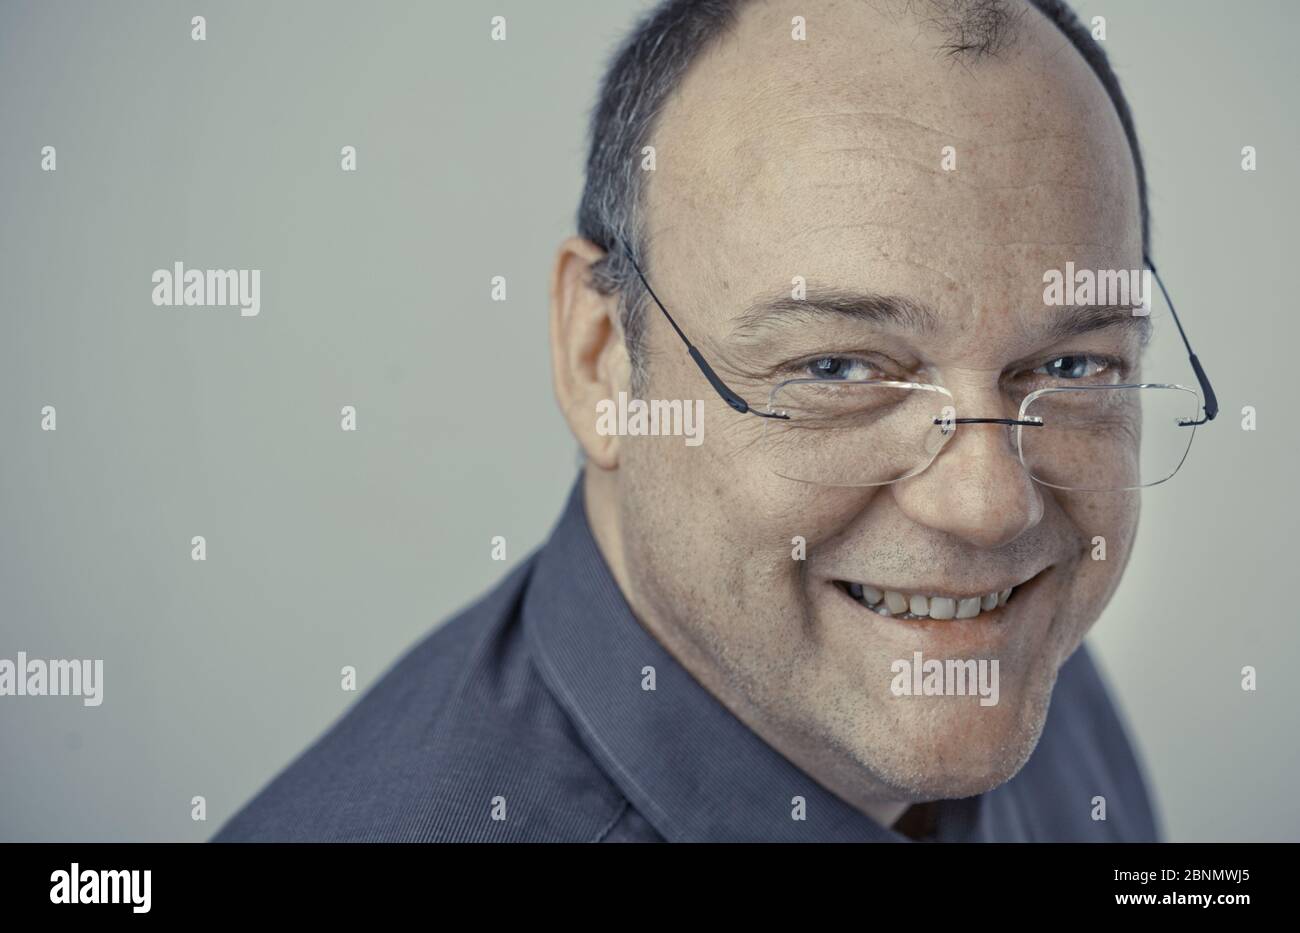 Elderly man with glasses and bald head looks happily at the camera Stock Photo